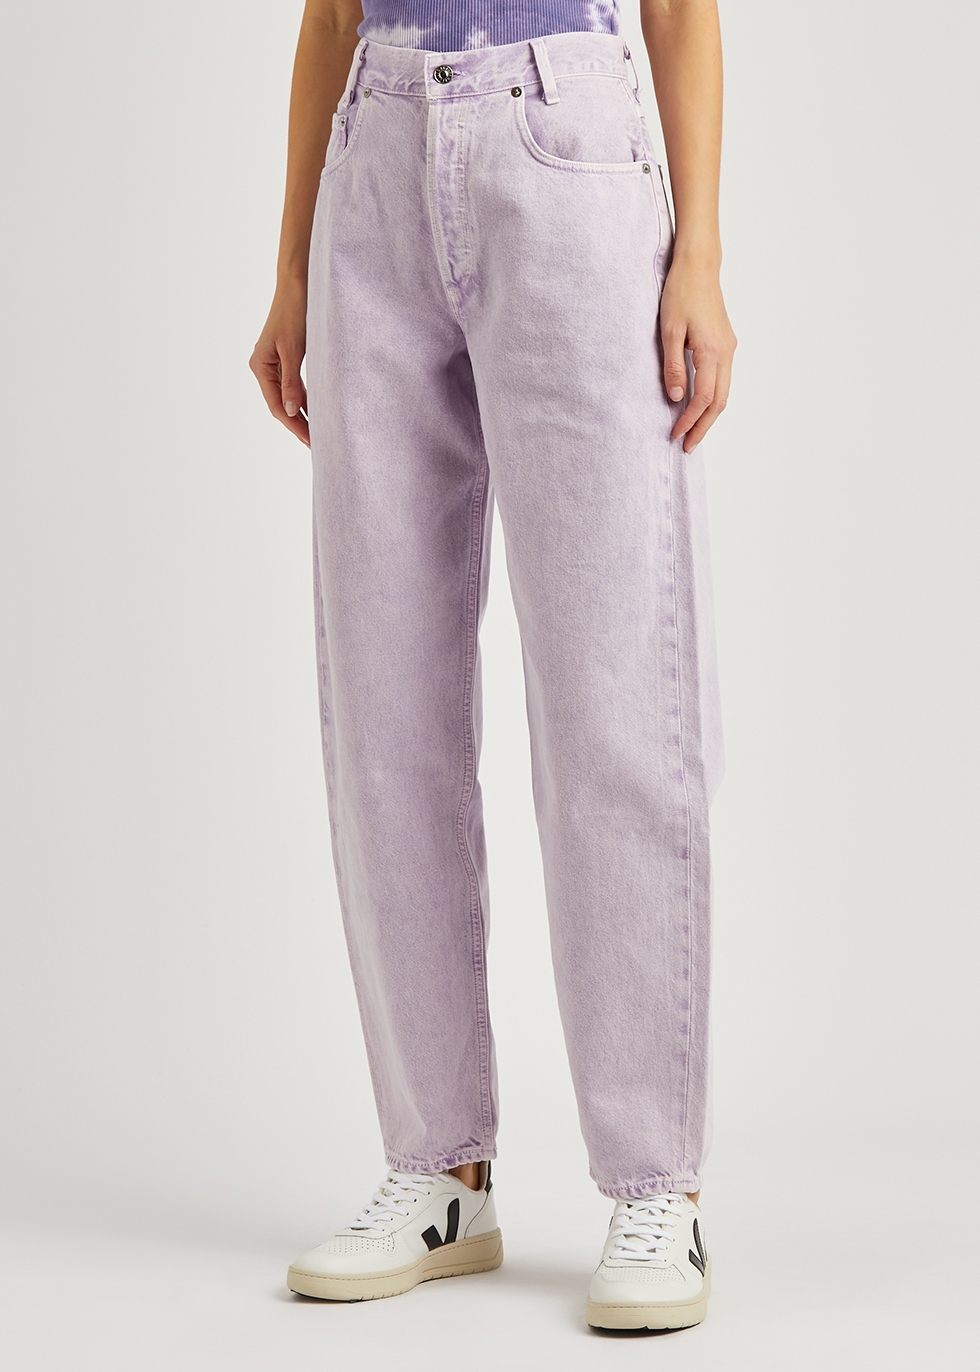 Harvey Nichols Women Clothing Jeans Tapered Jeans Balloon lilac tapered jeans 